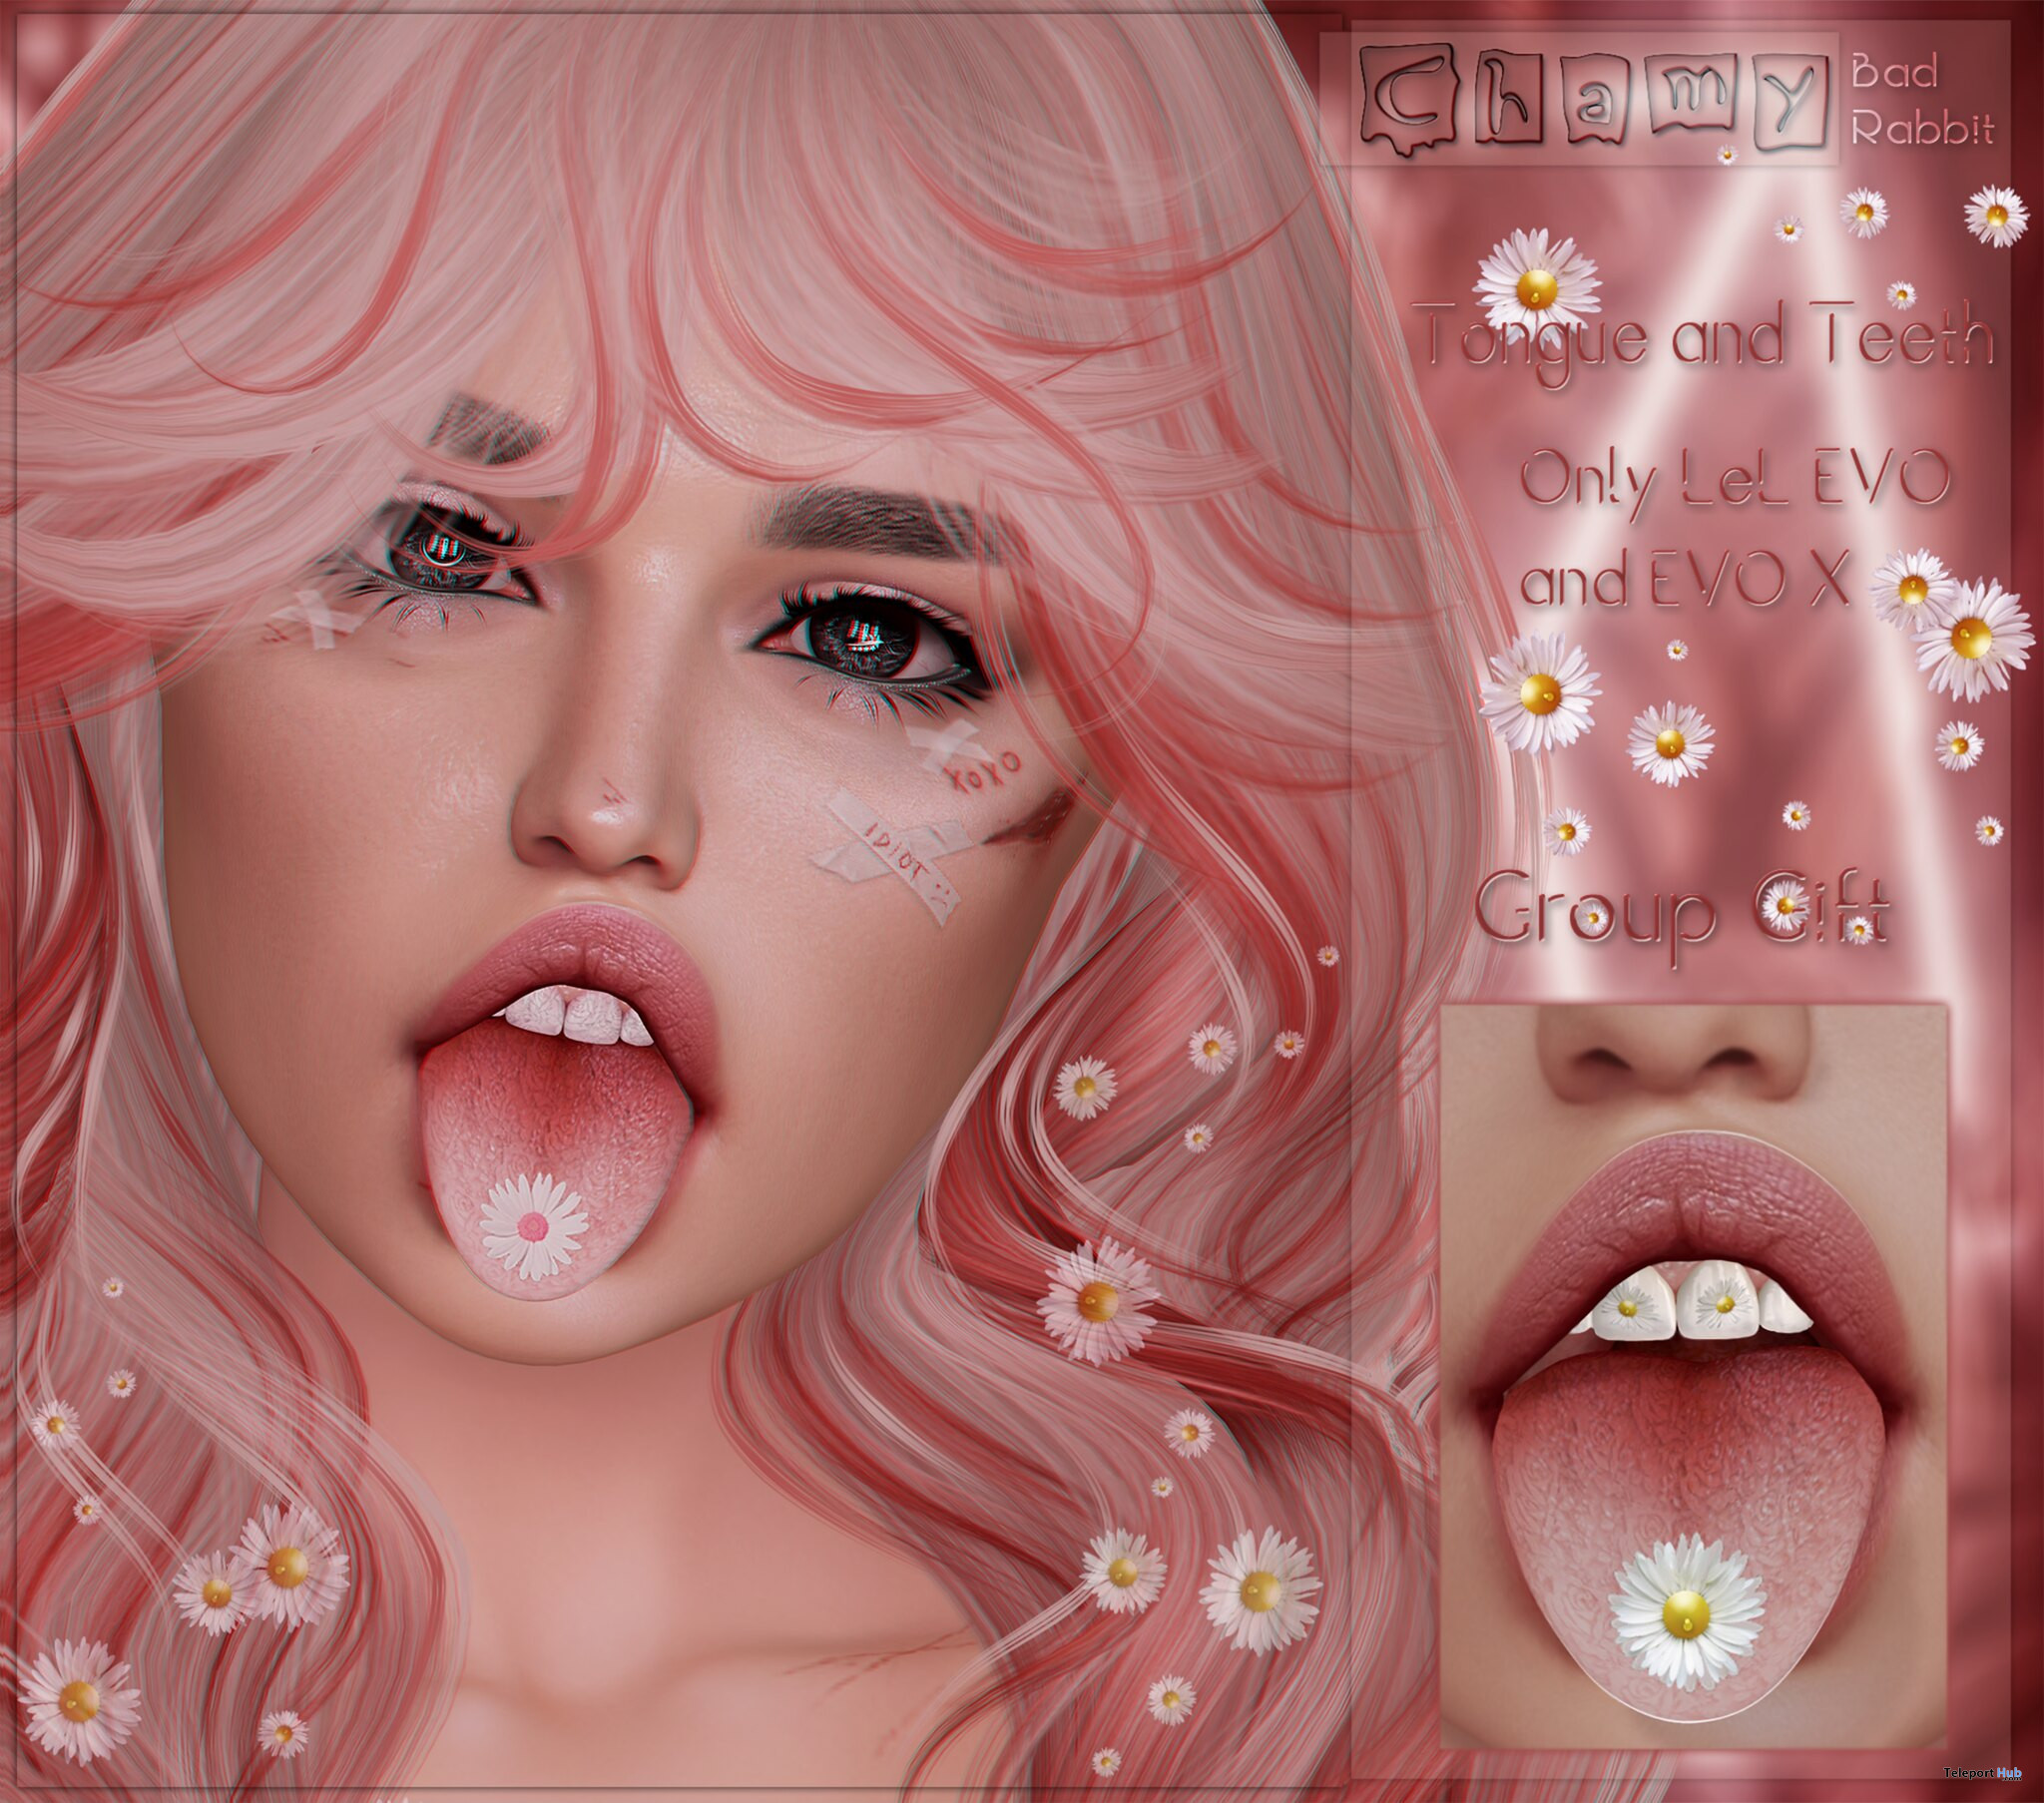 Chamy Tongue & Teeth March 2023 Group Gift by Bad Rabbit - Teleport Hub - teleporthub.com